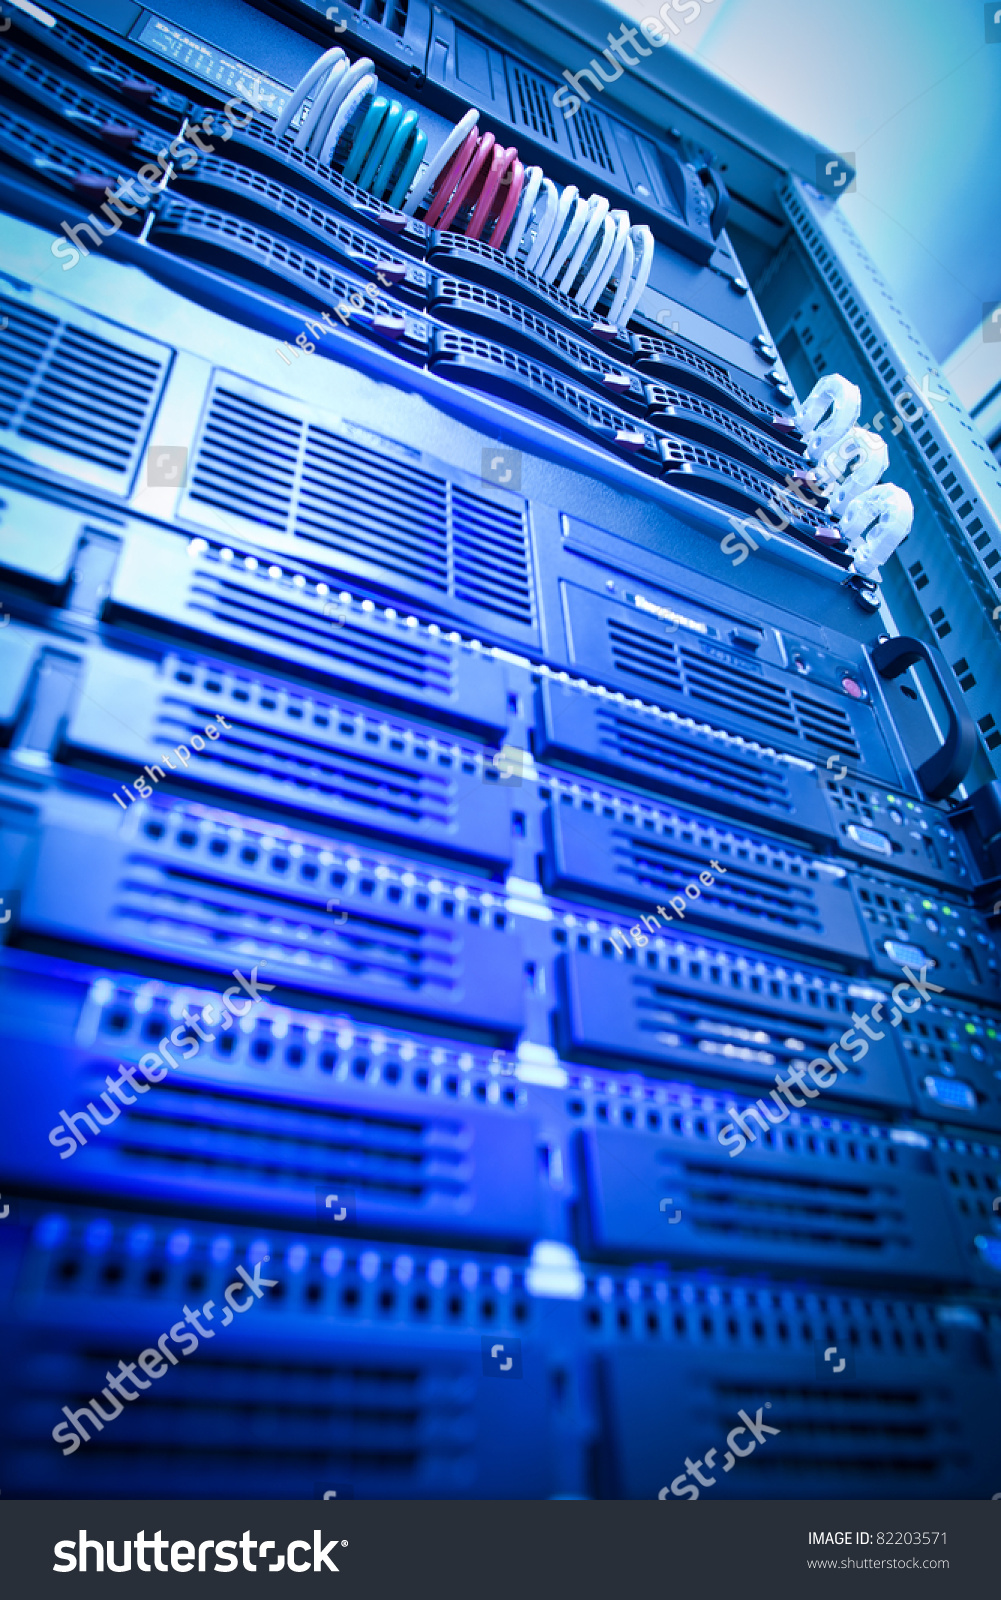 Server rack cluster in a data center (shallow DOF; color toned image) #82203571